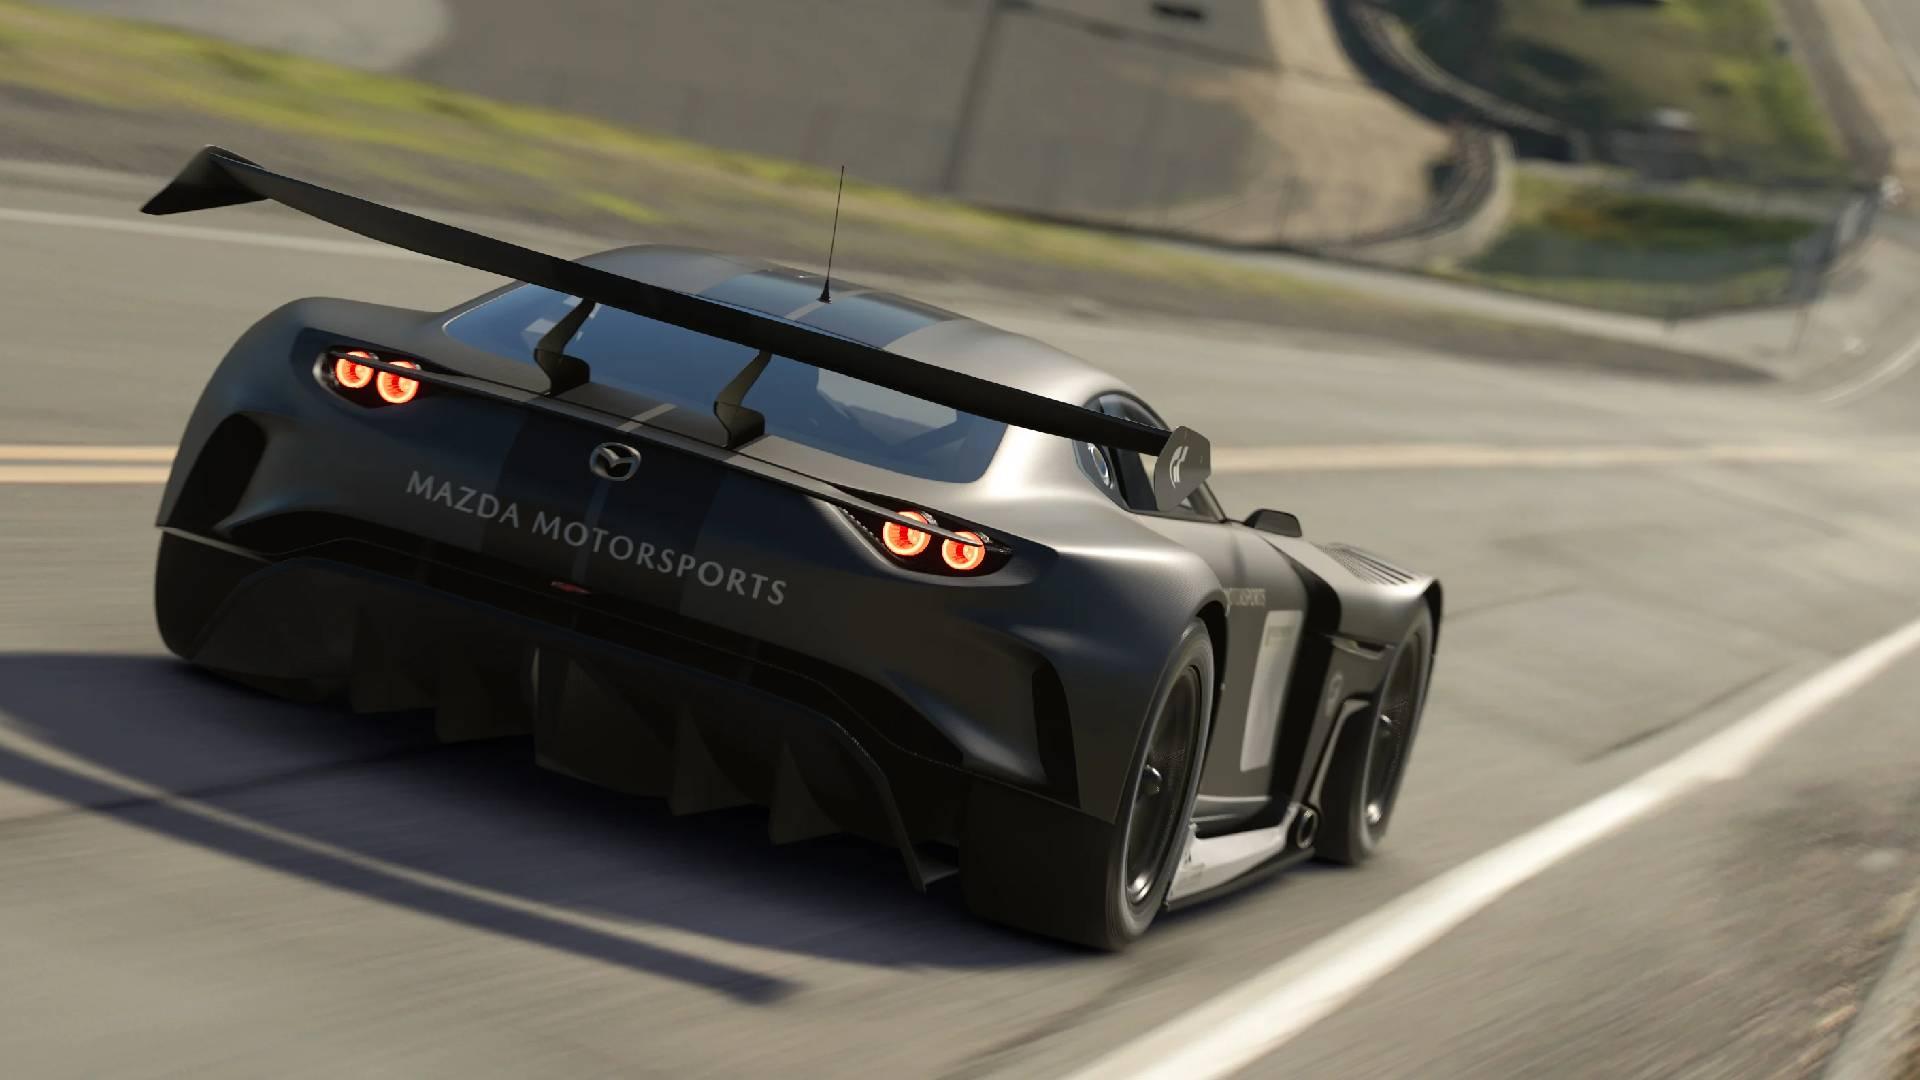 How big is Gran Turismo 7 on PS4 and PS5?